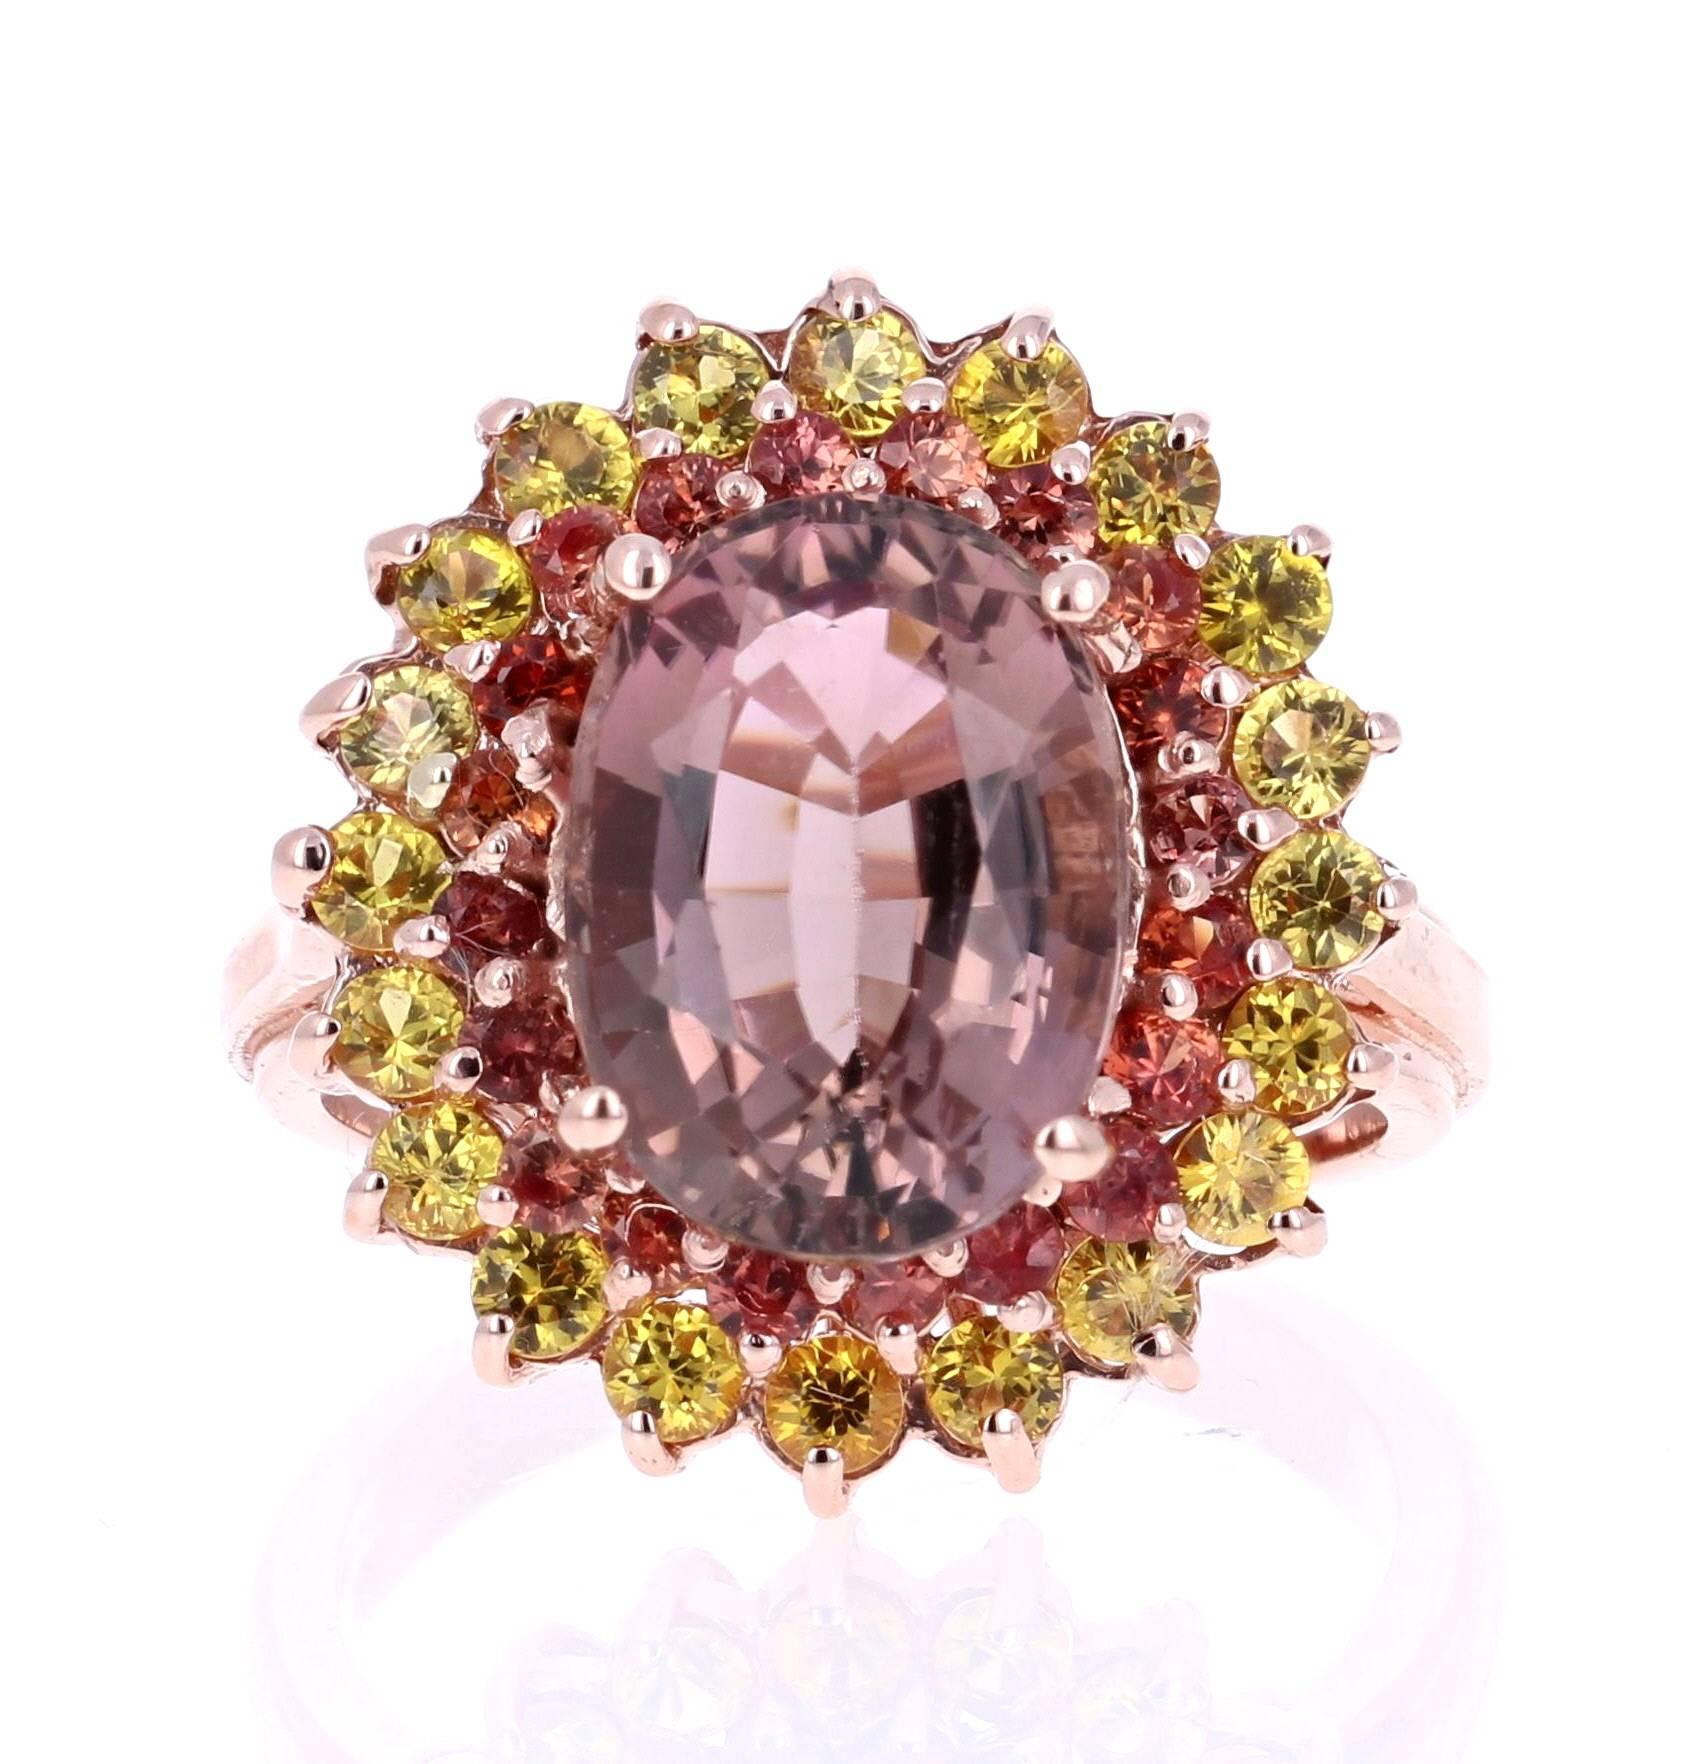 Stunning and uniquely designed 6.86 Carat Sapphire Tourmaline Rose Gold Cocktail Ring!

This ring has a 5.12 carat Oval Cut Tourmaline that is set in the center of the ring and is surrounded by 20 Round Cut Orange Sapphires that weigh 0.64 carats